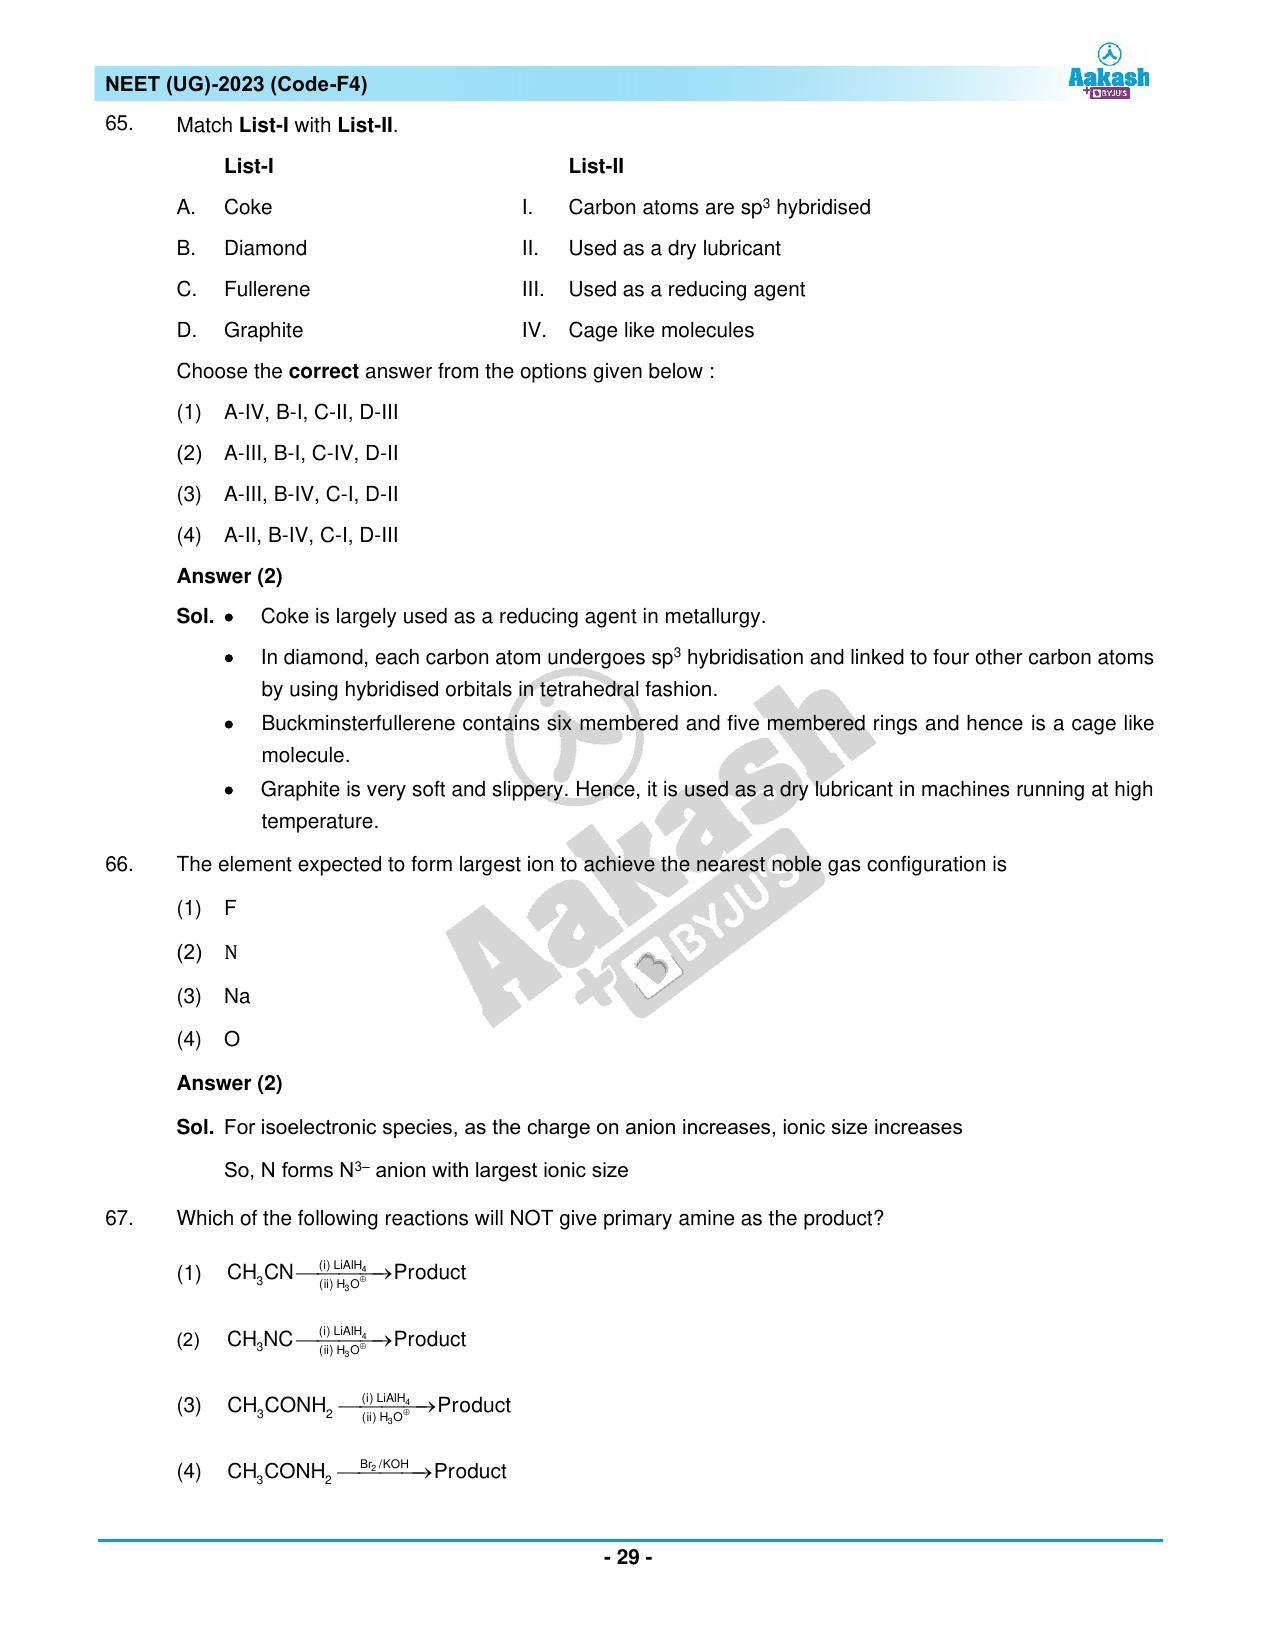 NEET 2023 Question Paper F4 - Page 29